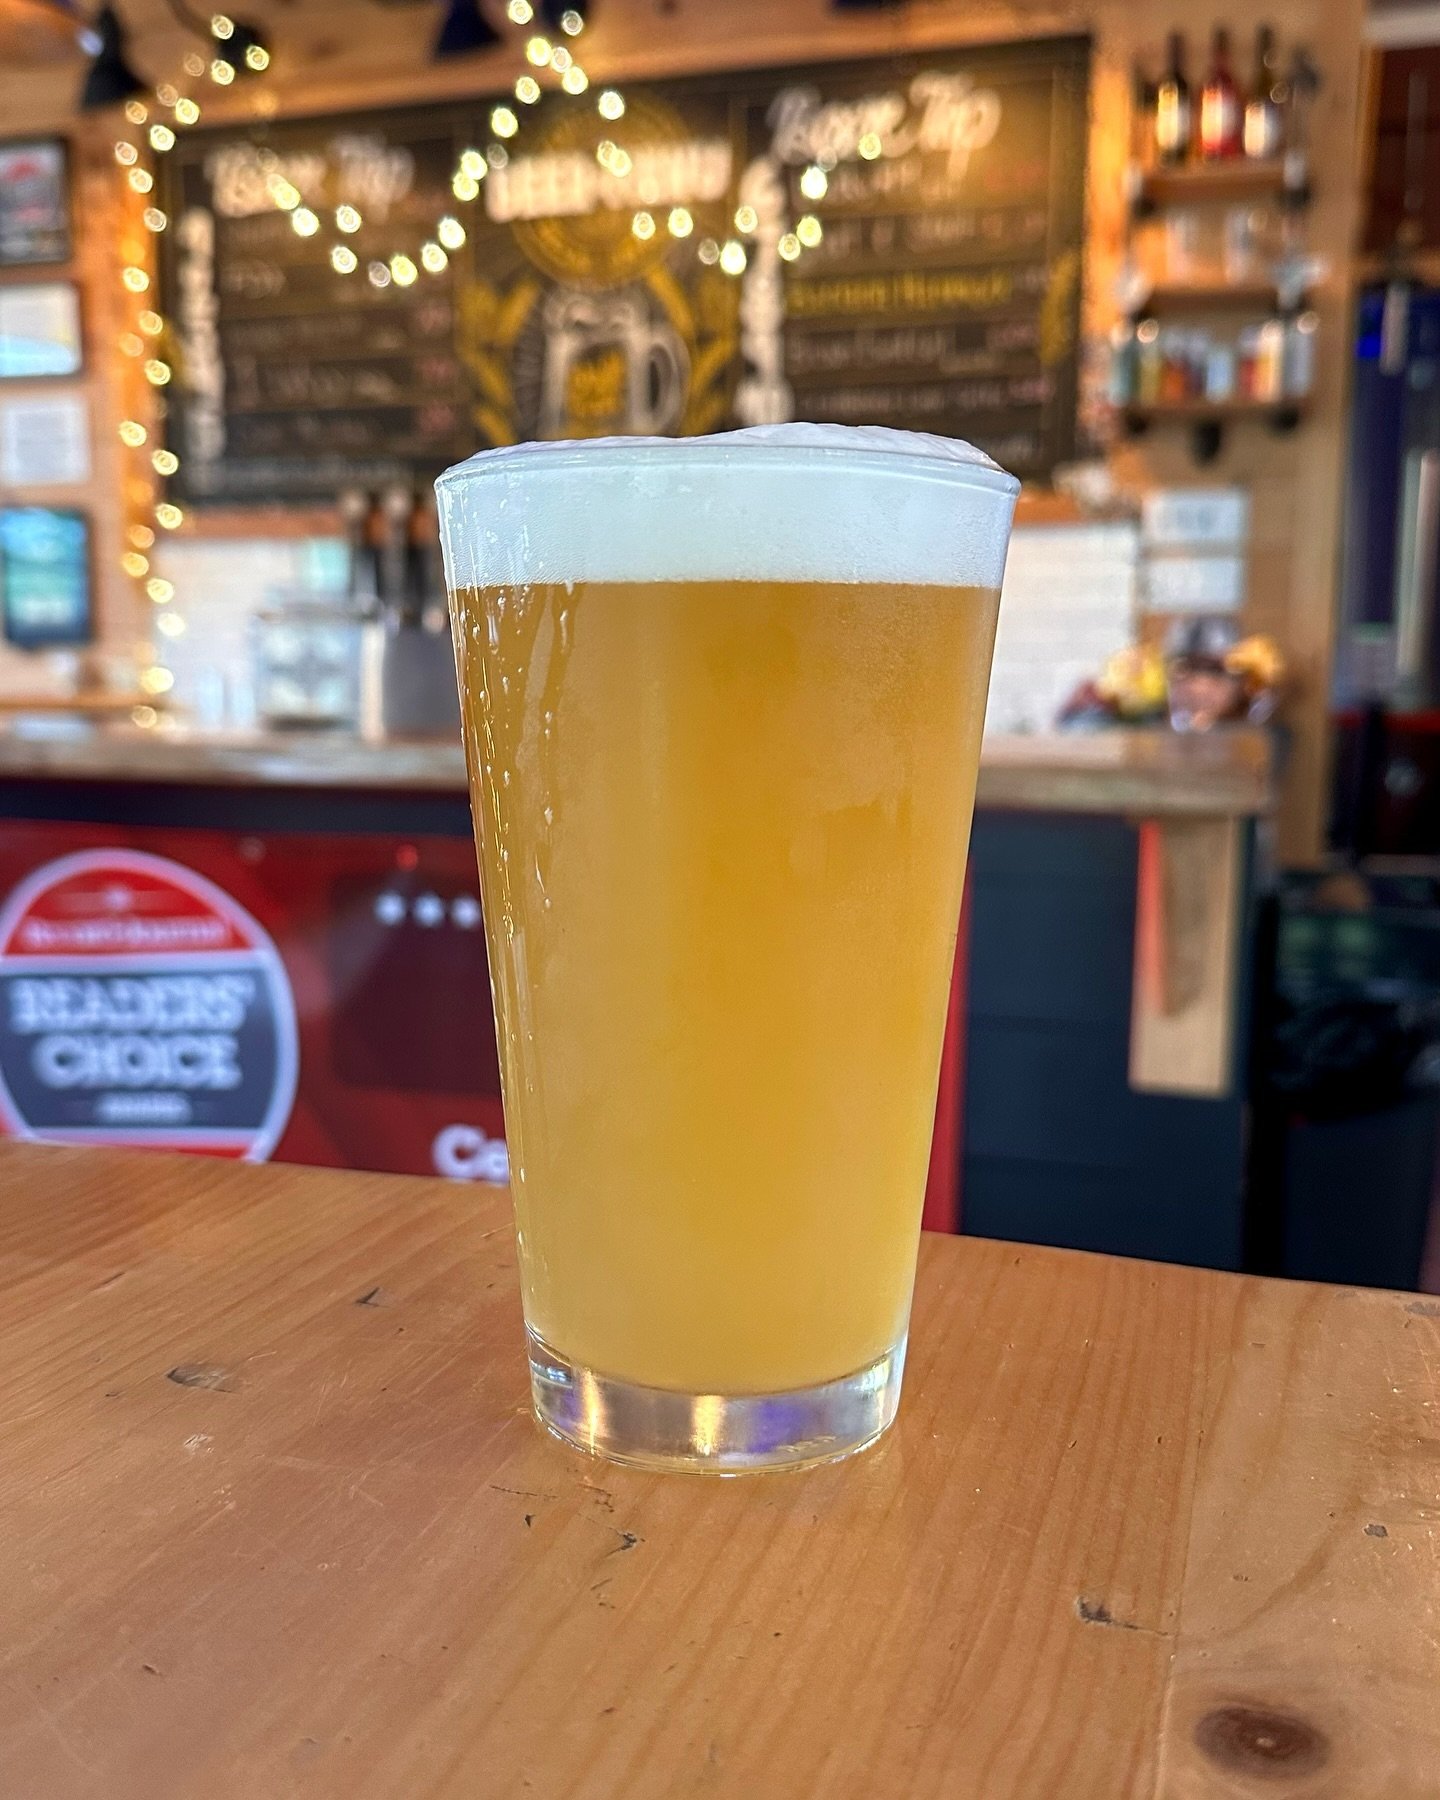 1 - Way SMaSH (Single Malt and Single Hop) IPA is a delicious Wednesday treat. Perfectly crisp with a great hop flavor from the Centennial hops. On tap now!

#beer #brewery #ctbeer #friends